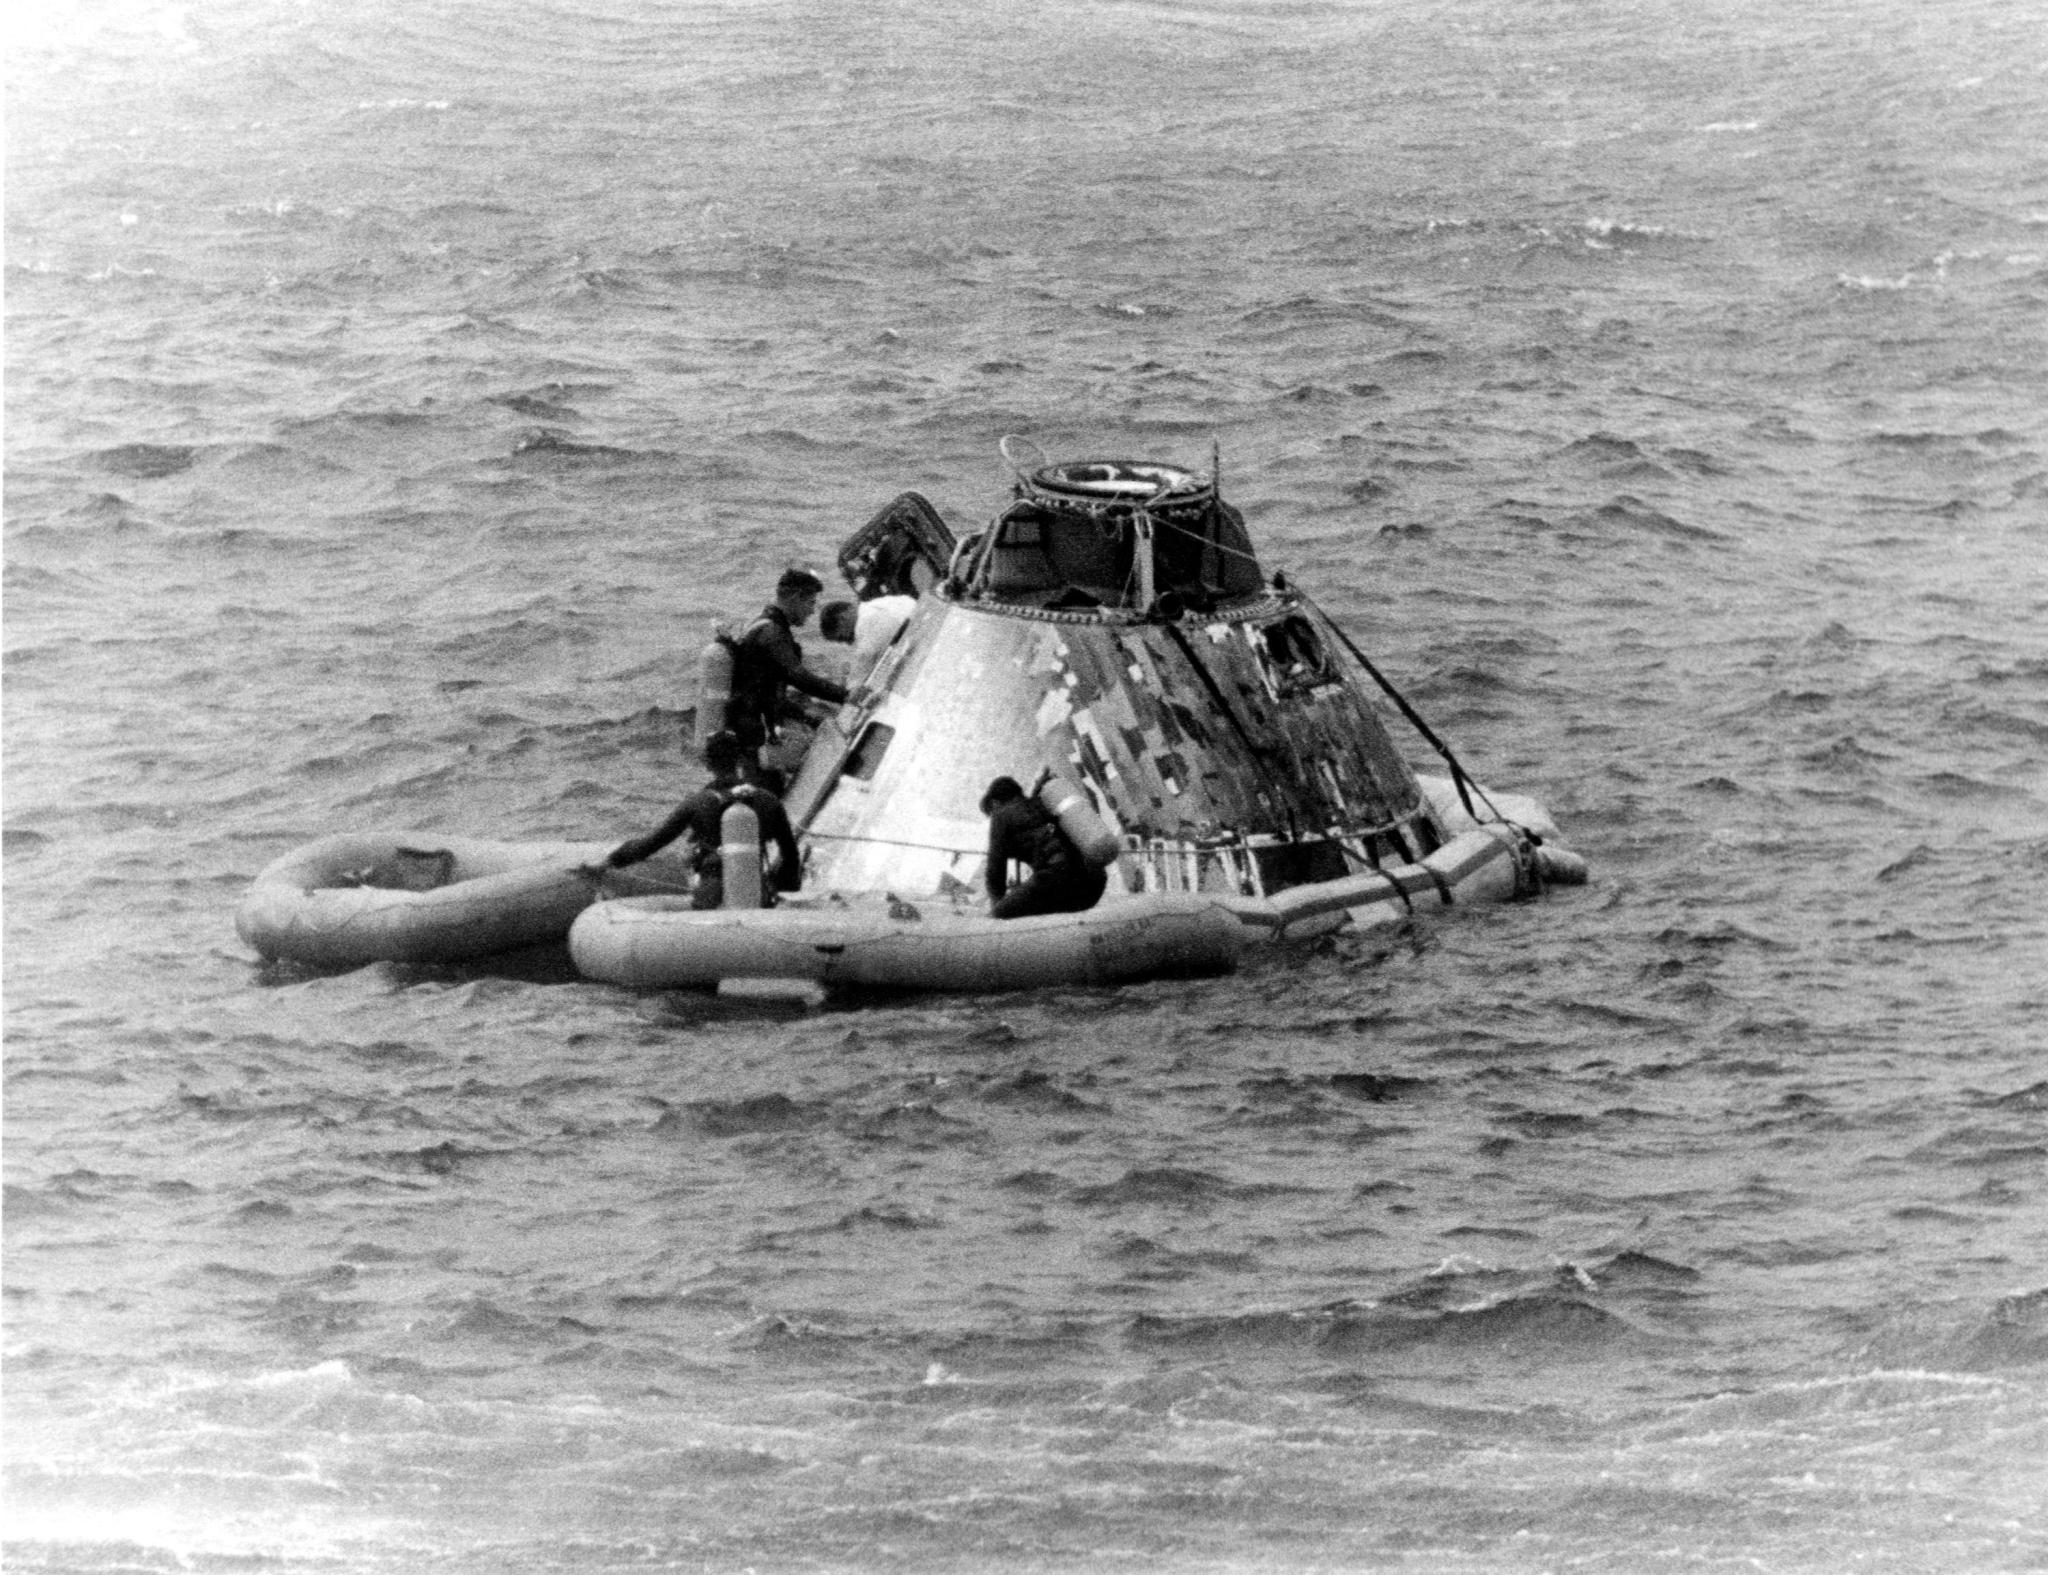 Recovery of the Apollo 9 crew in the Atlantic Ocean on March 13, 1969.